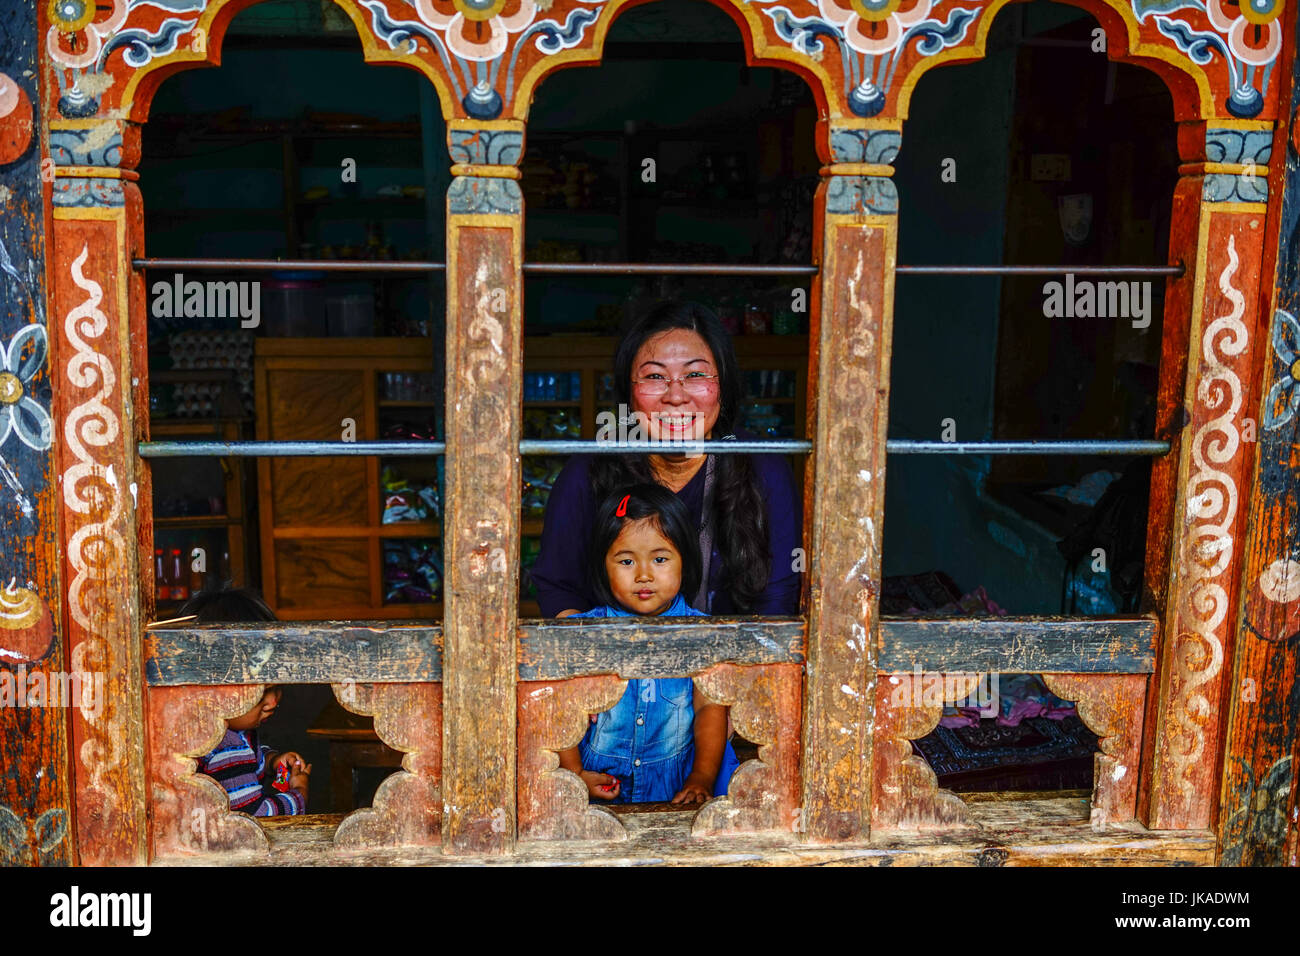 Thimphu, Bhutan - Aug 29, 2015. A Tibetan woman with her child at a traditional house in Thimphu, Bhutan. Bhutan is a small country in the Himalayas b Stock Photo